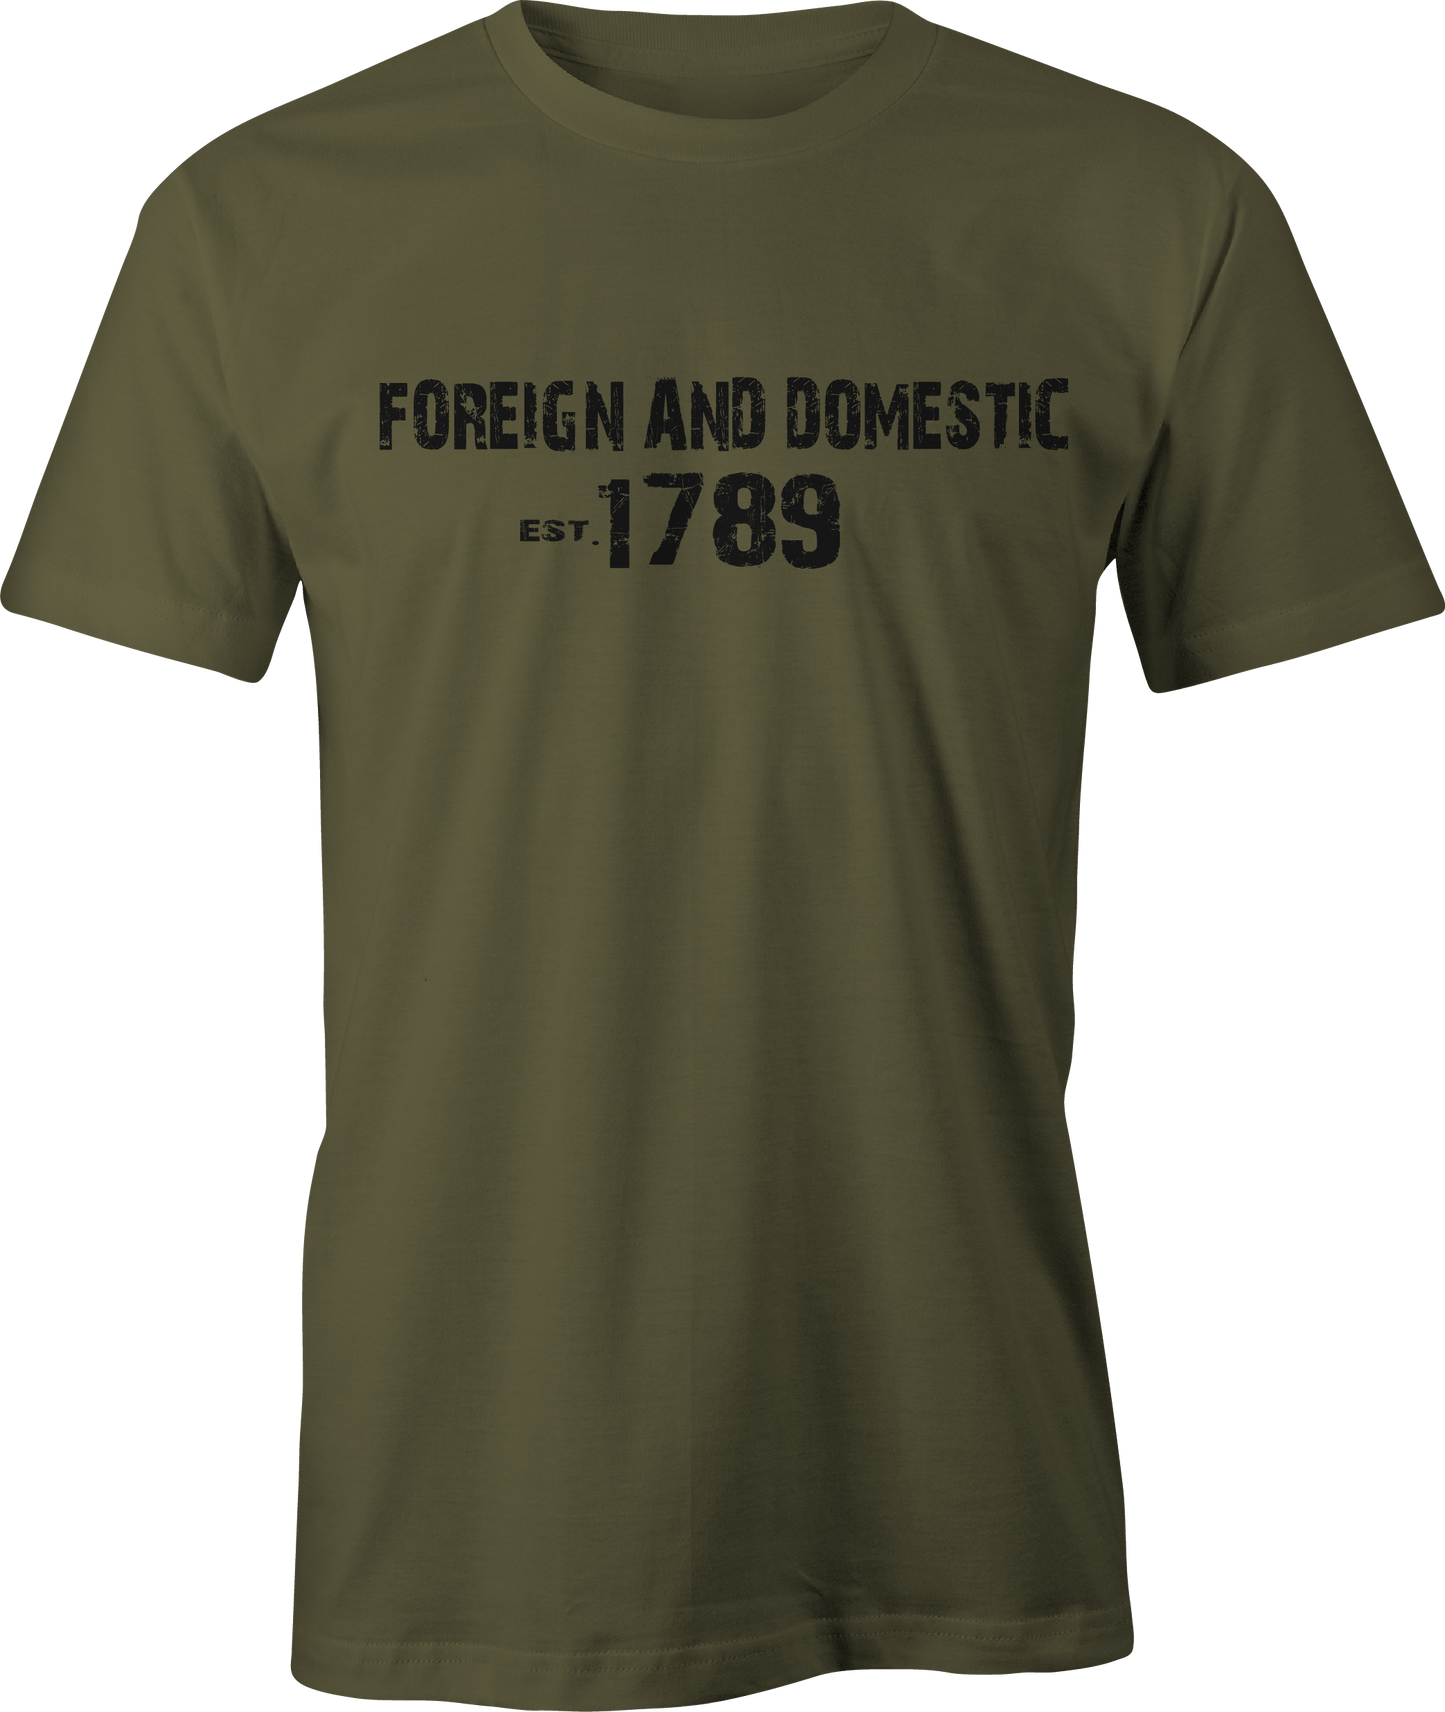 Foreign and domestic tee 1789